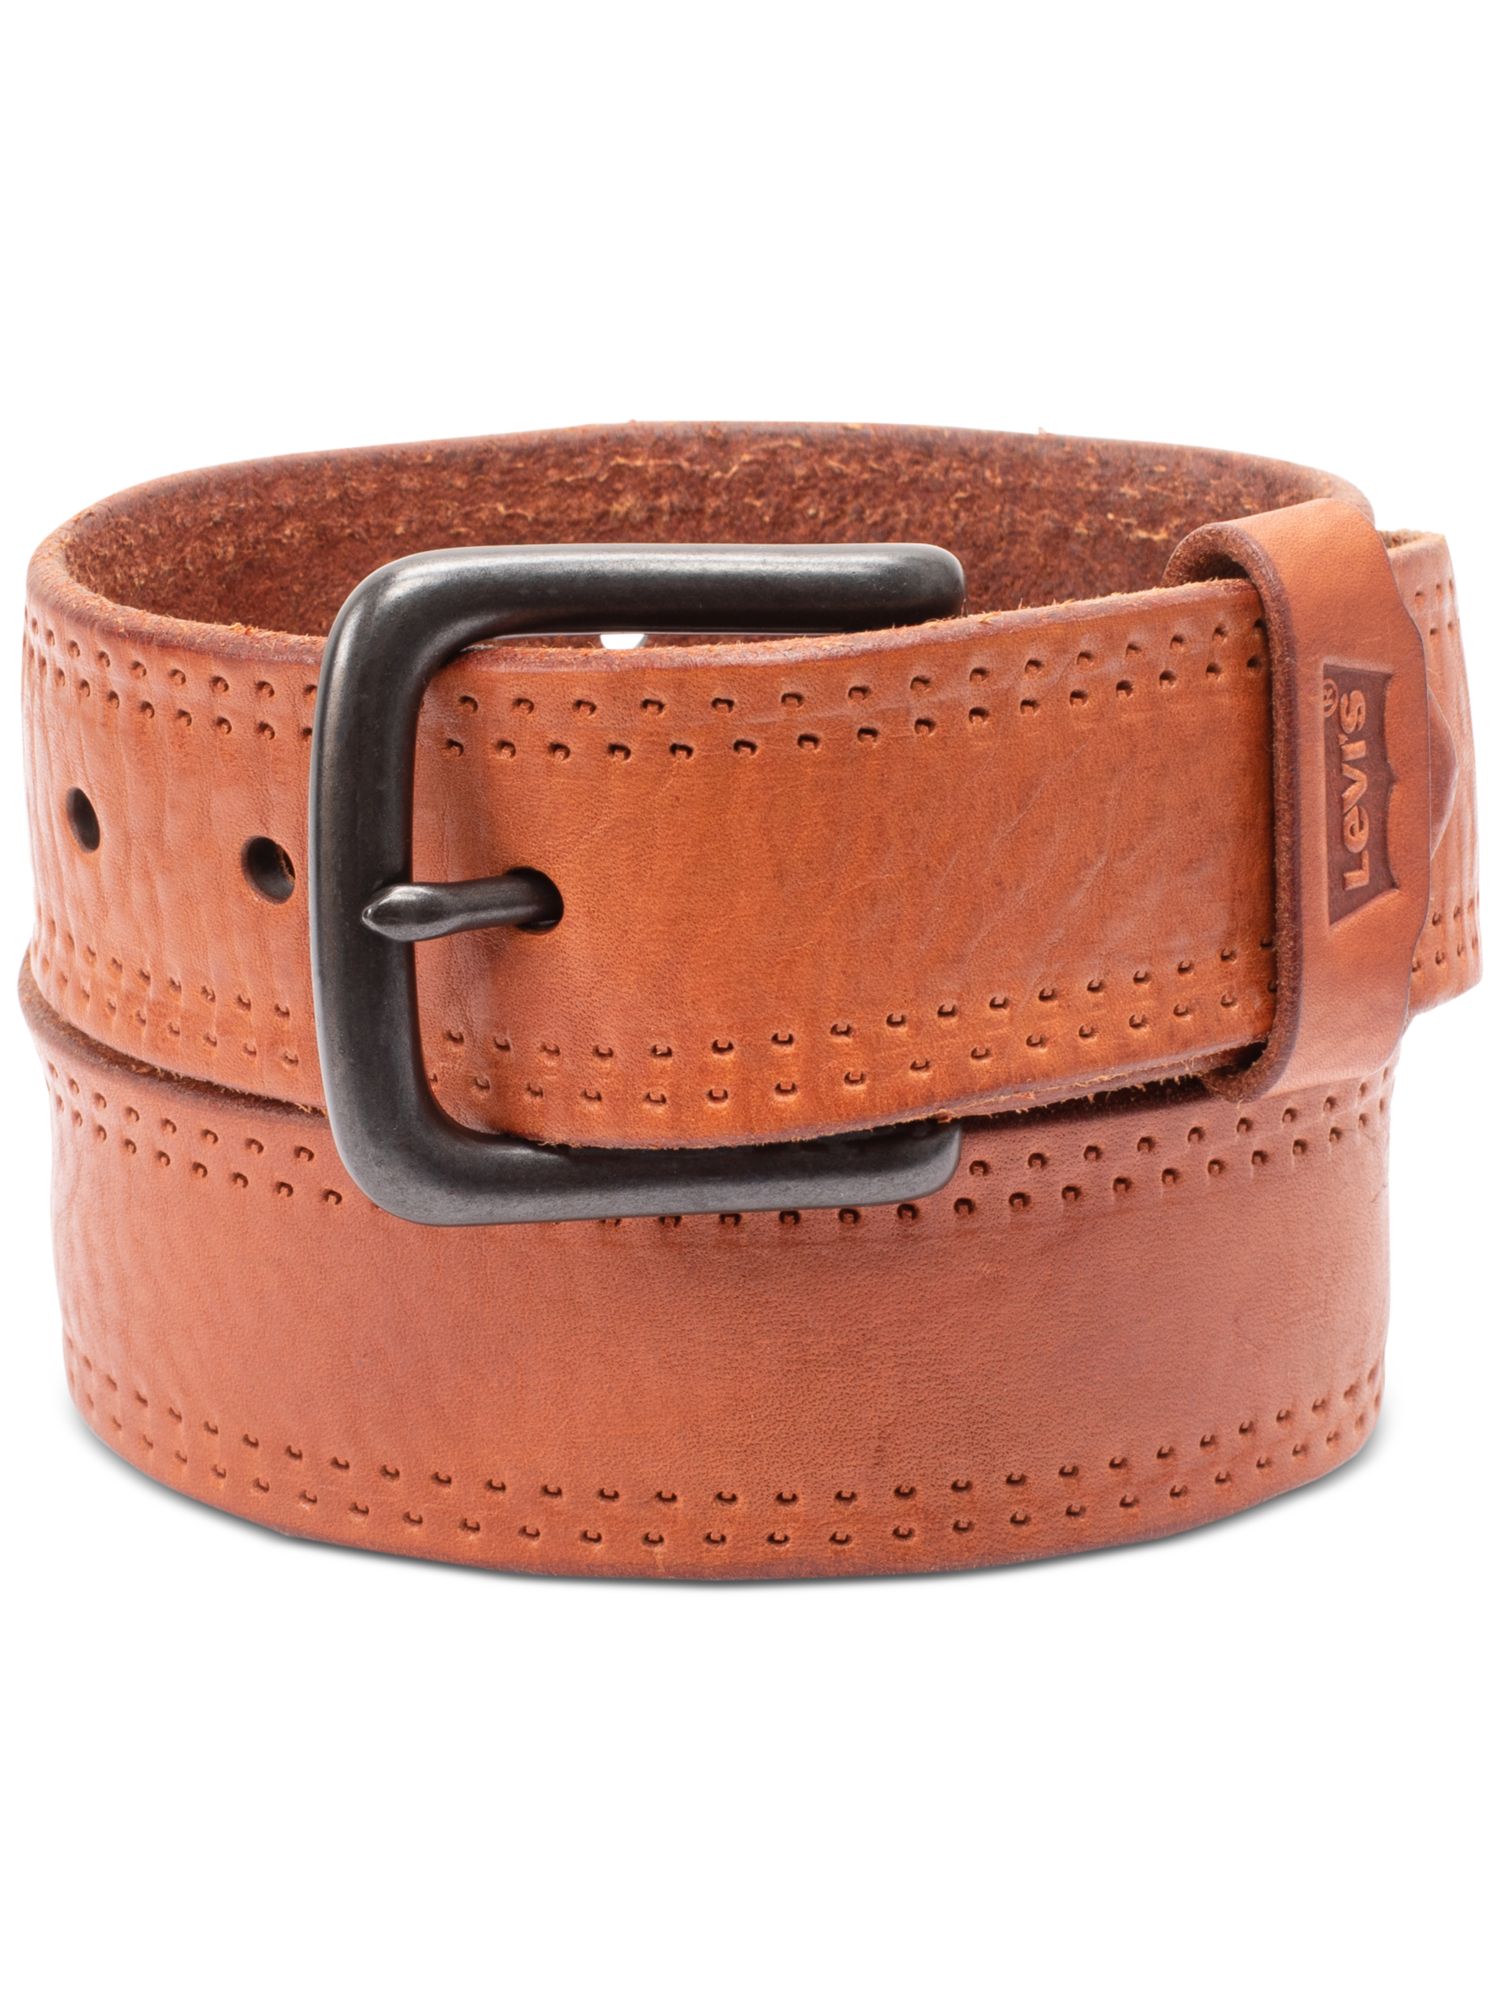 LEVI'S Mens Brown Logo Leather Casual Belt S 30-32